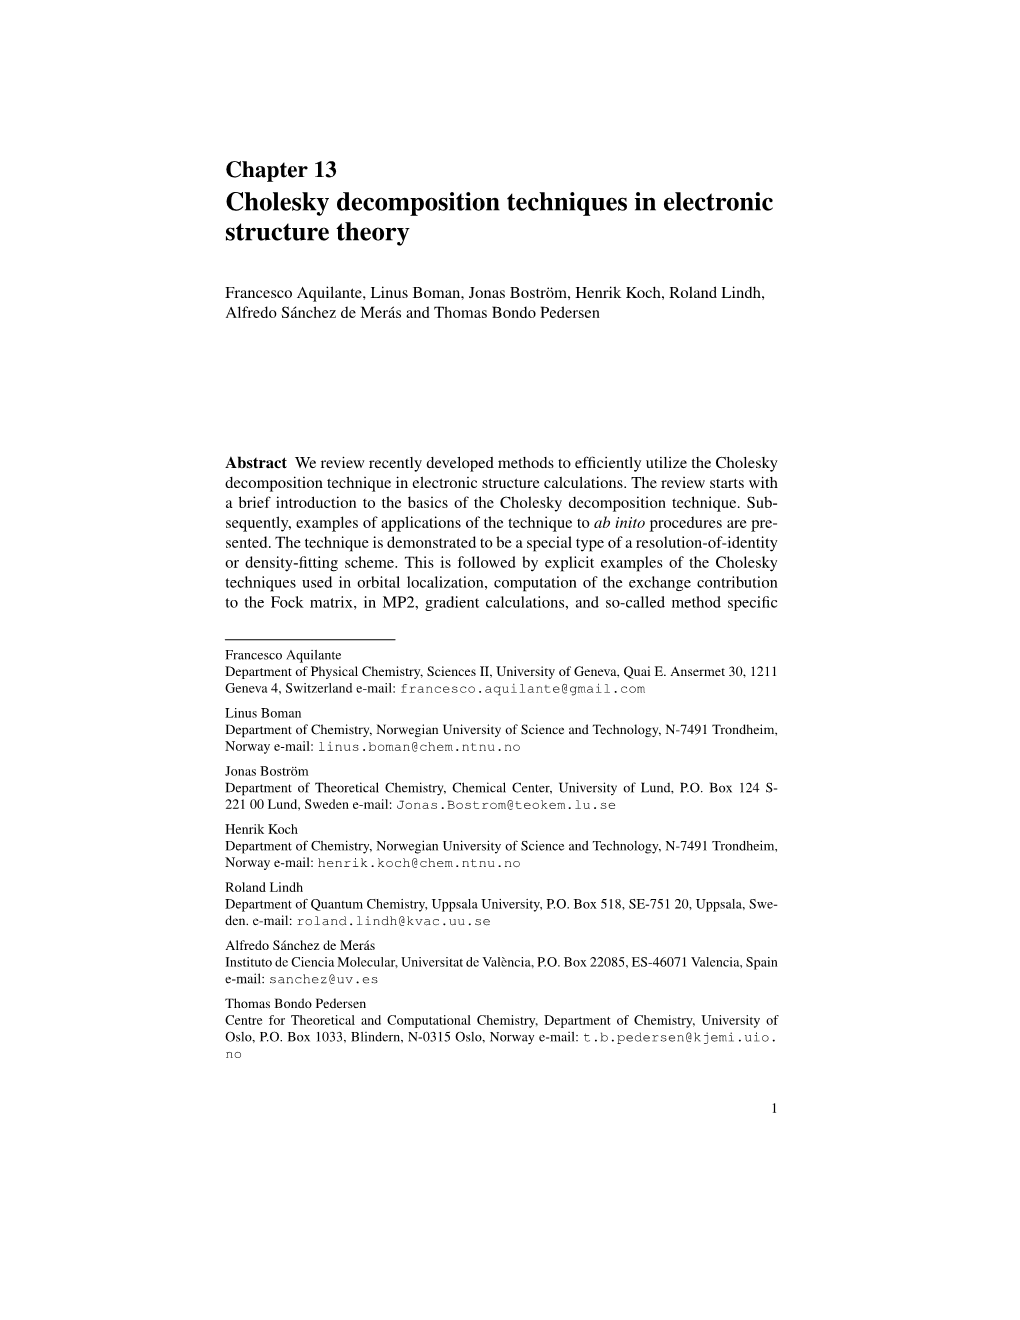 Cholesky Decomposition Techniques in Electronic Structure Theory